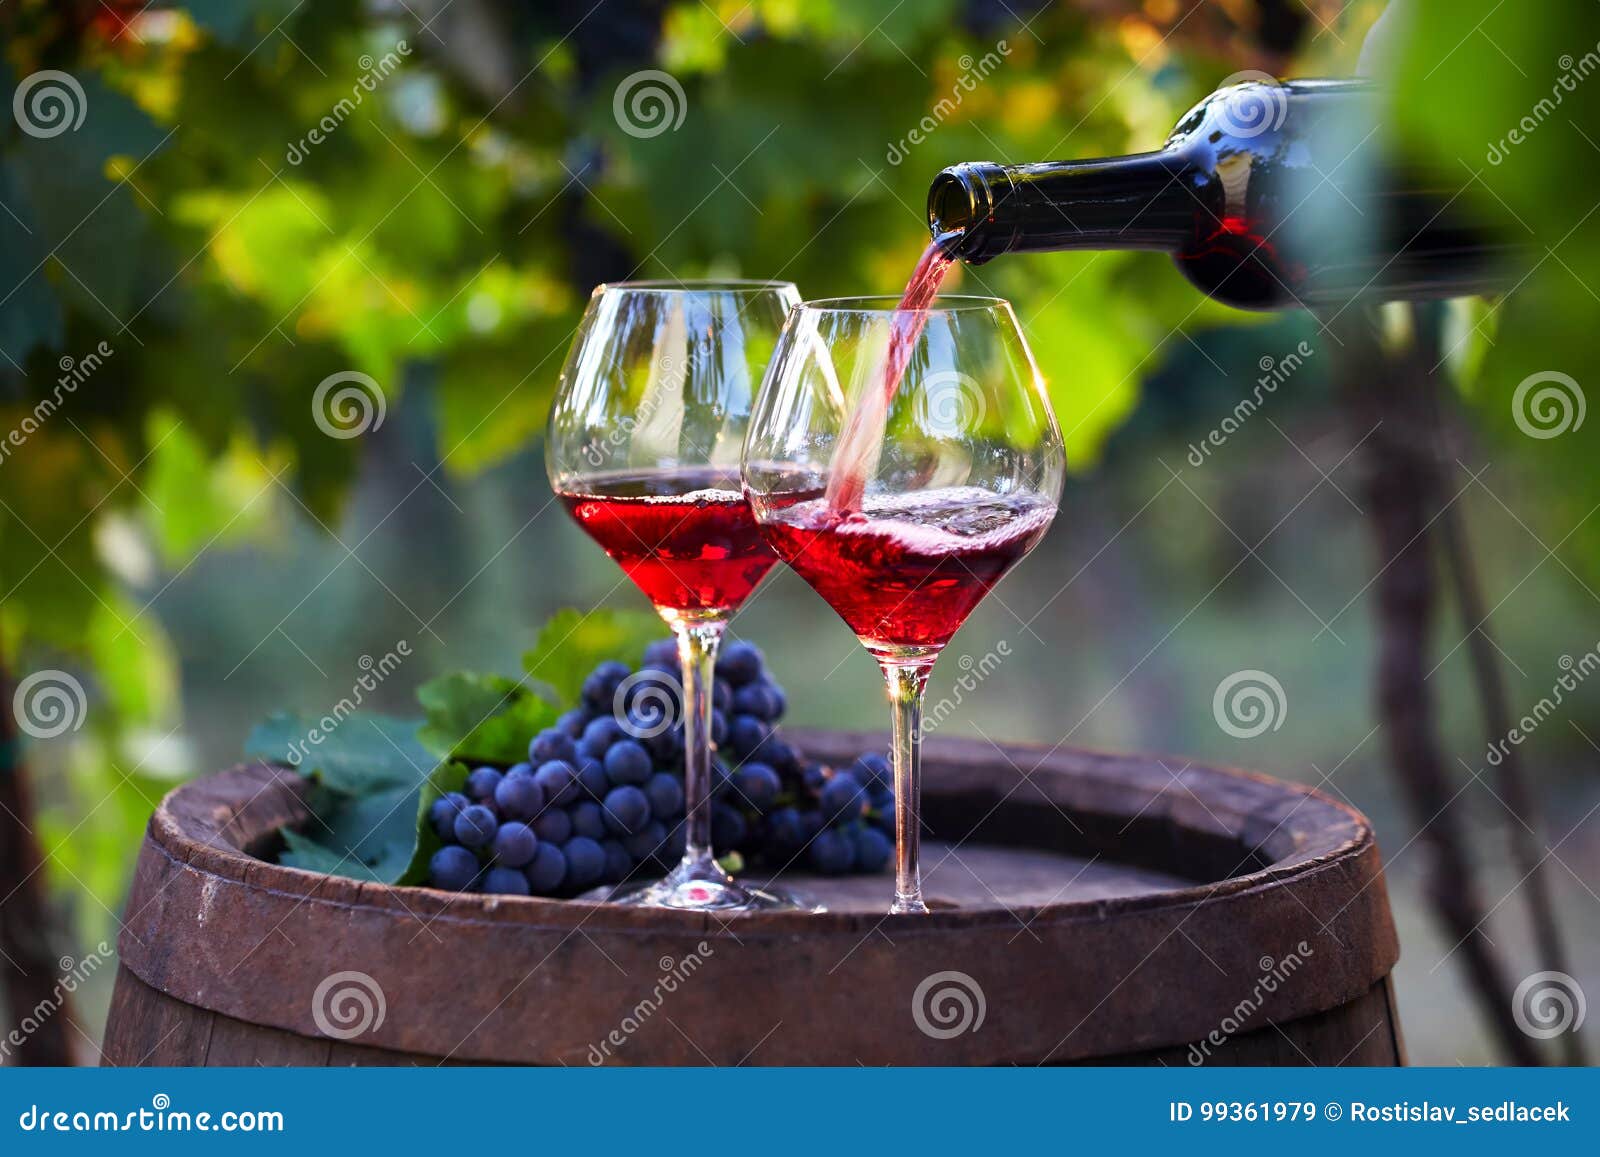 Pouring Red Wine into Glasses Stock Image - Image of wineglass ...